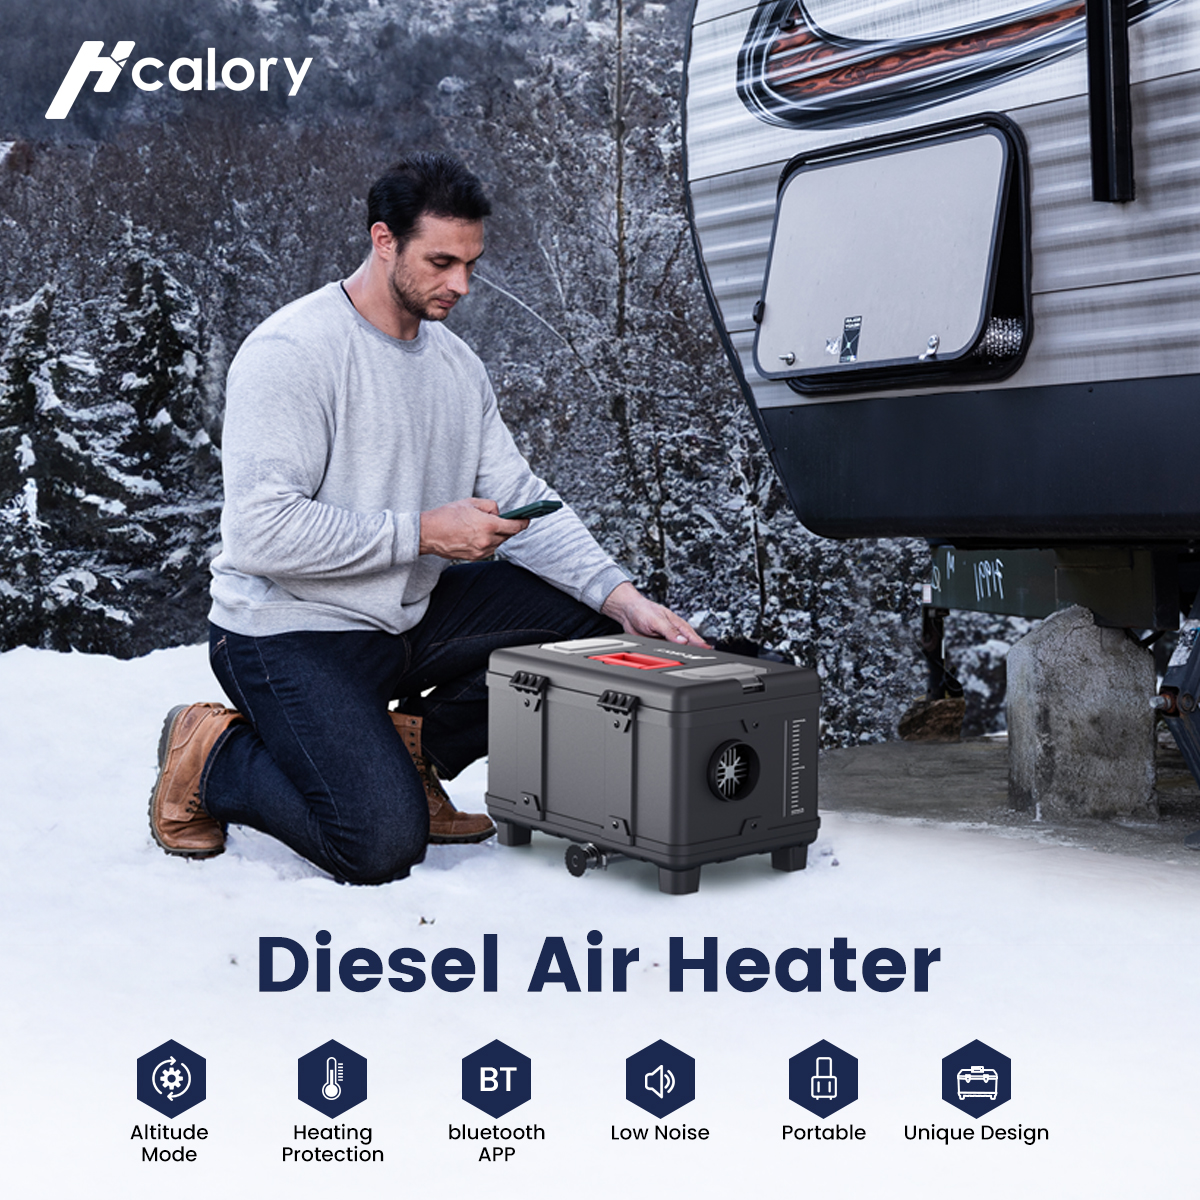 HCALORY Diesel Air Heater, 12V DC & 110V AC 5KW-8KW Horizontal All-In-One Portable Parking Heater with Bluetooth APP Control for Car Trucks Boat RV Trailer Motorhomes Camper and Home, Black - image 3 of 21